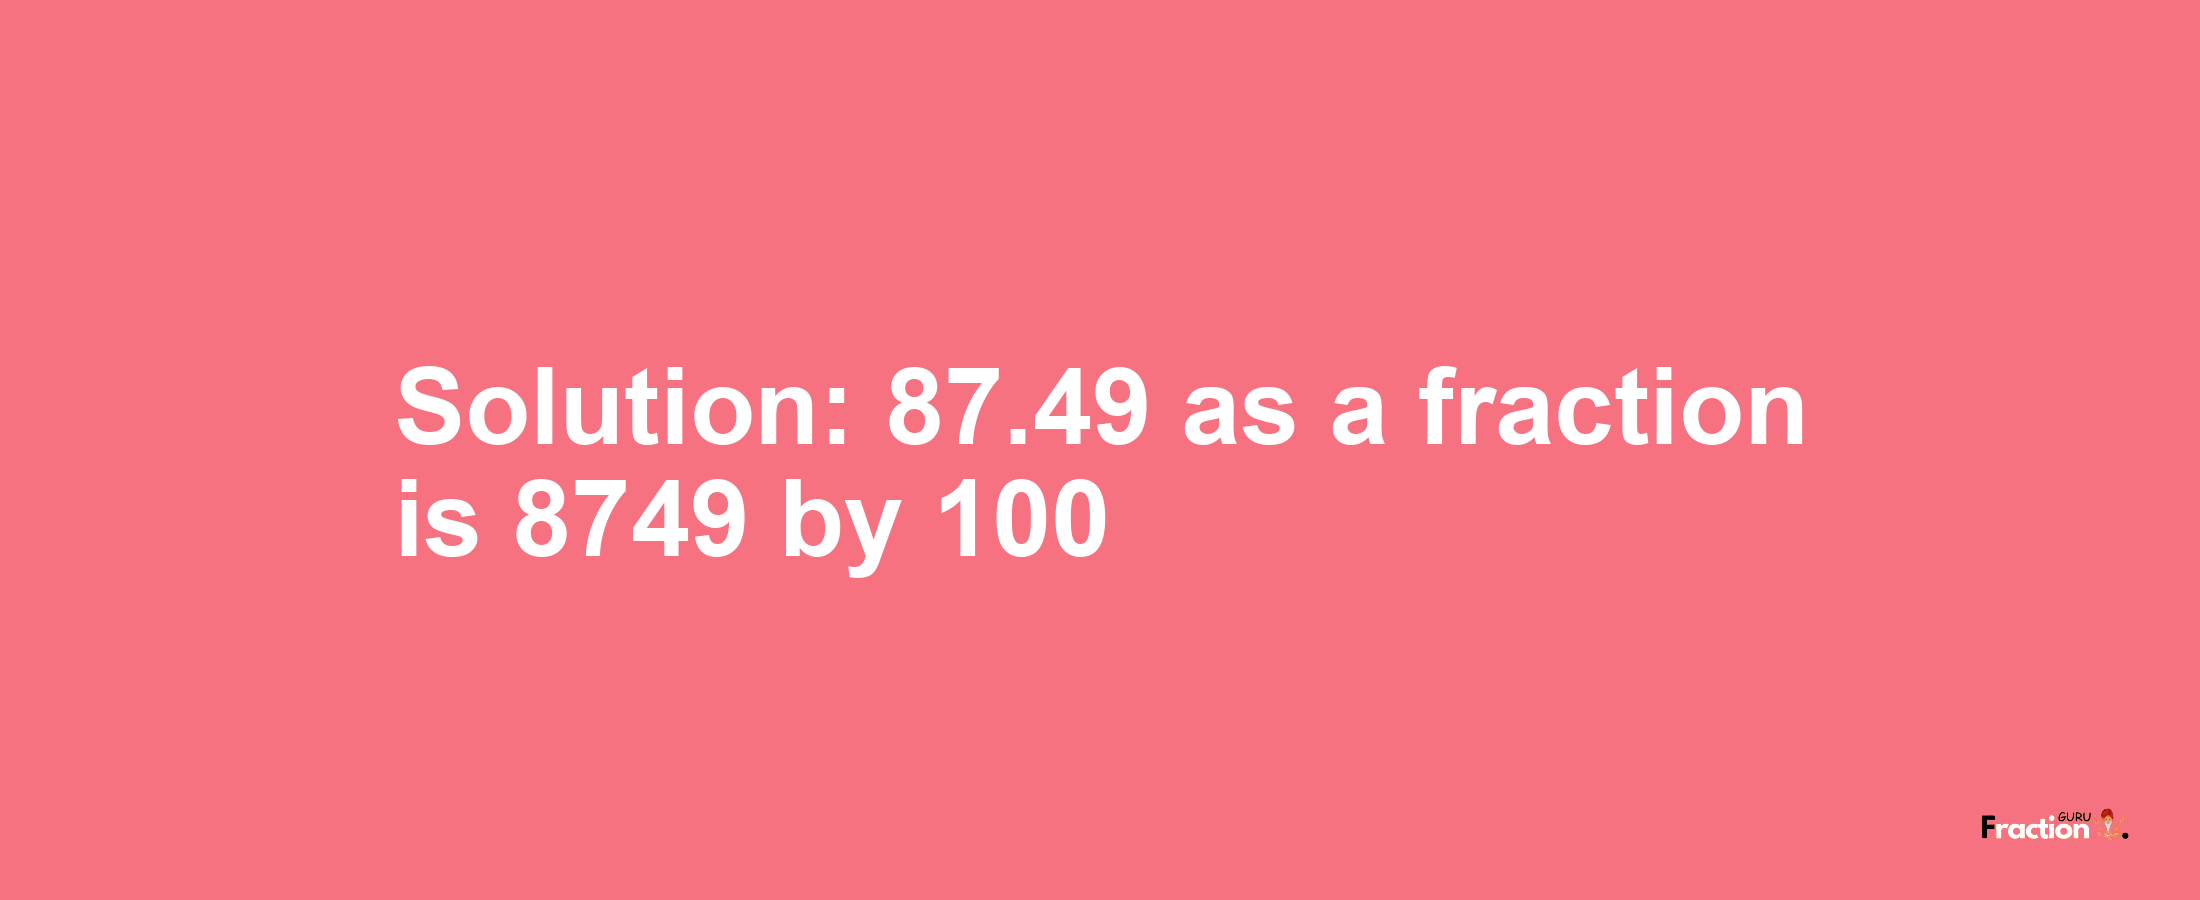 Solution:87.49 as a fraction is 8749/100